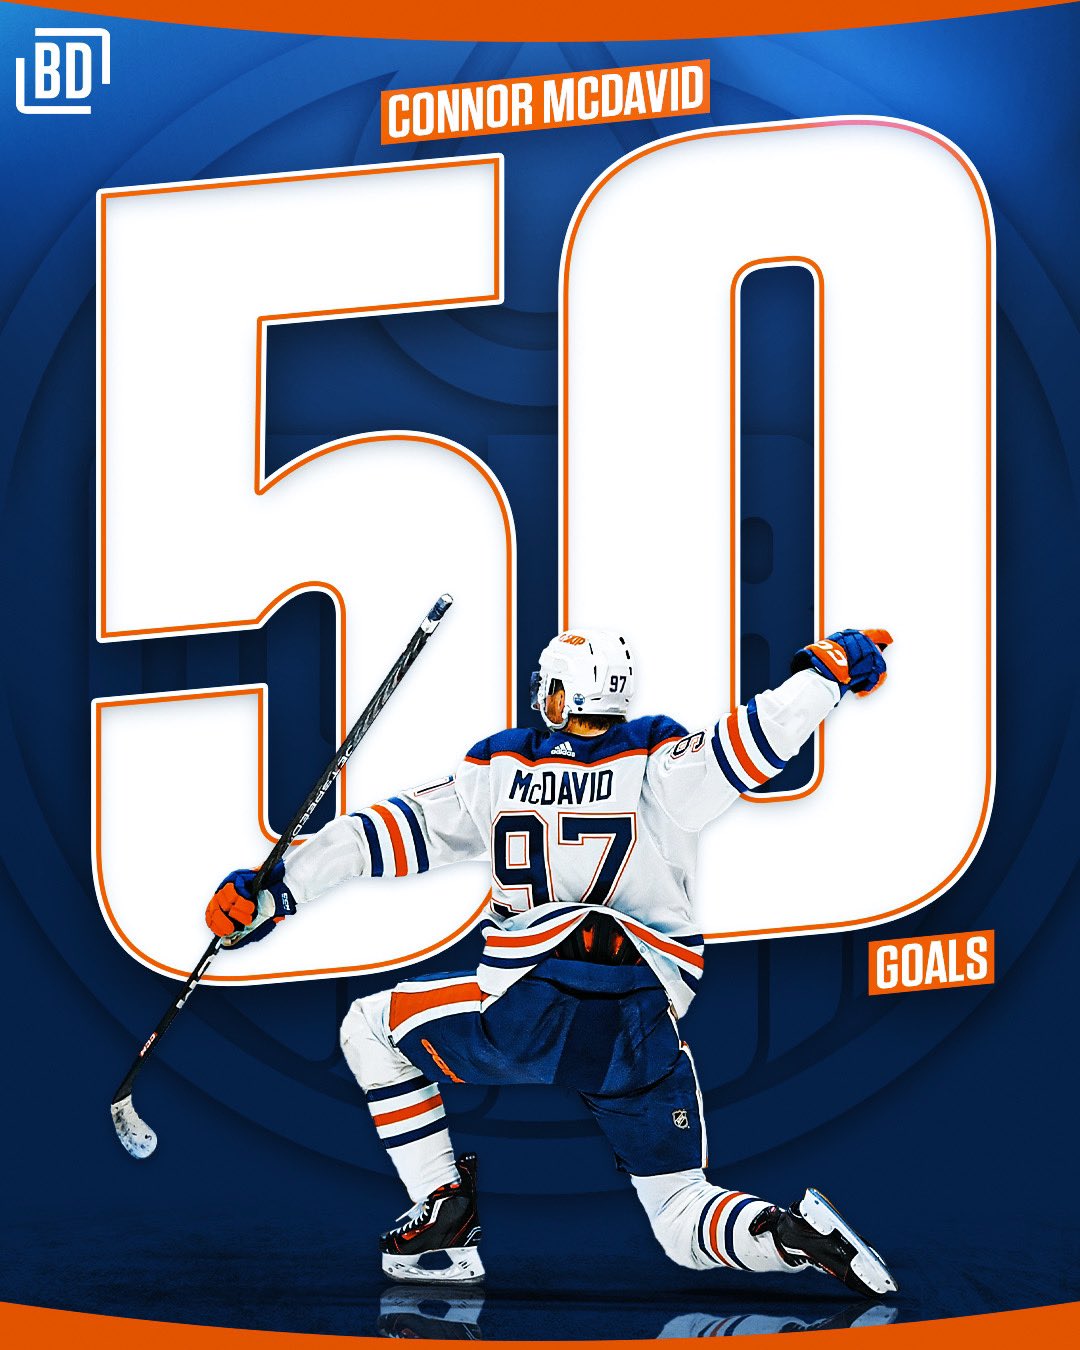 Connor McDavid becomes the first player to hit 50 goals on the season,  hitting the benchmark for the first time in his career!